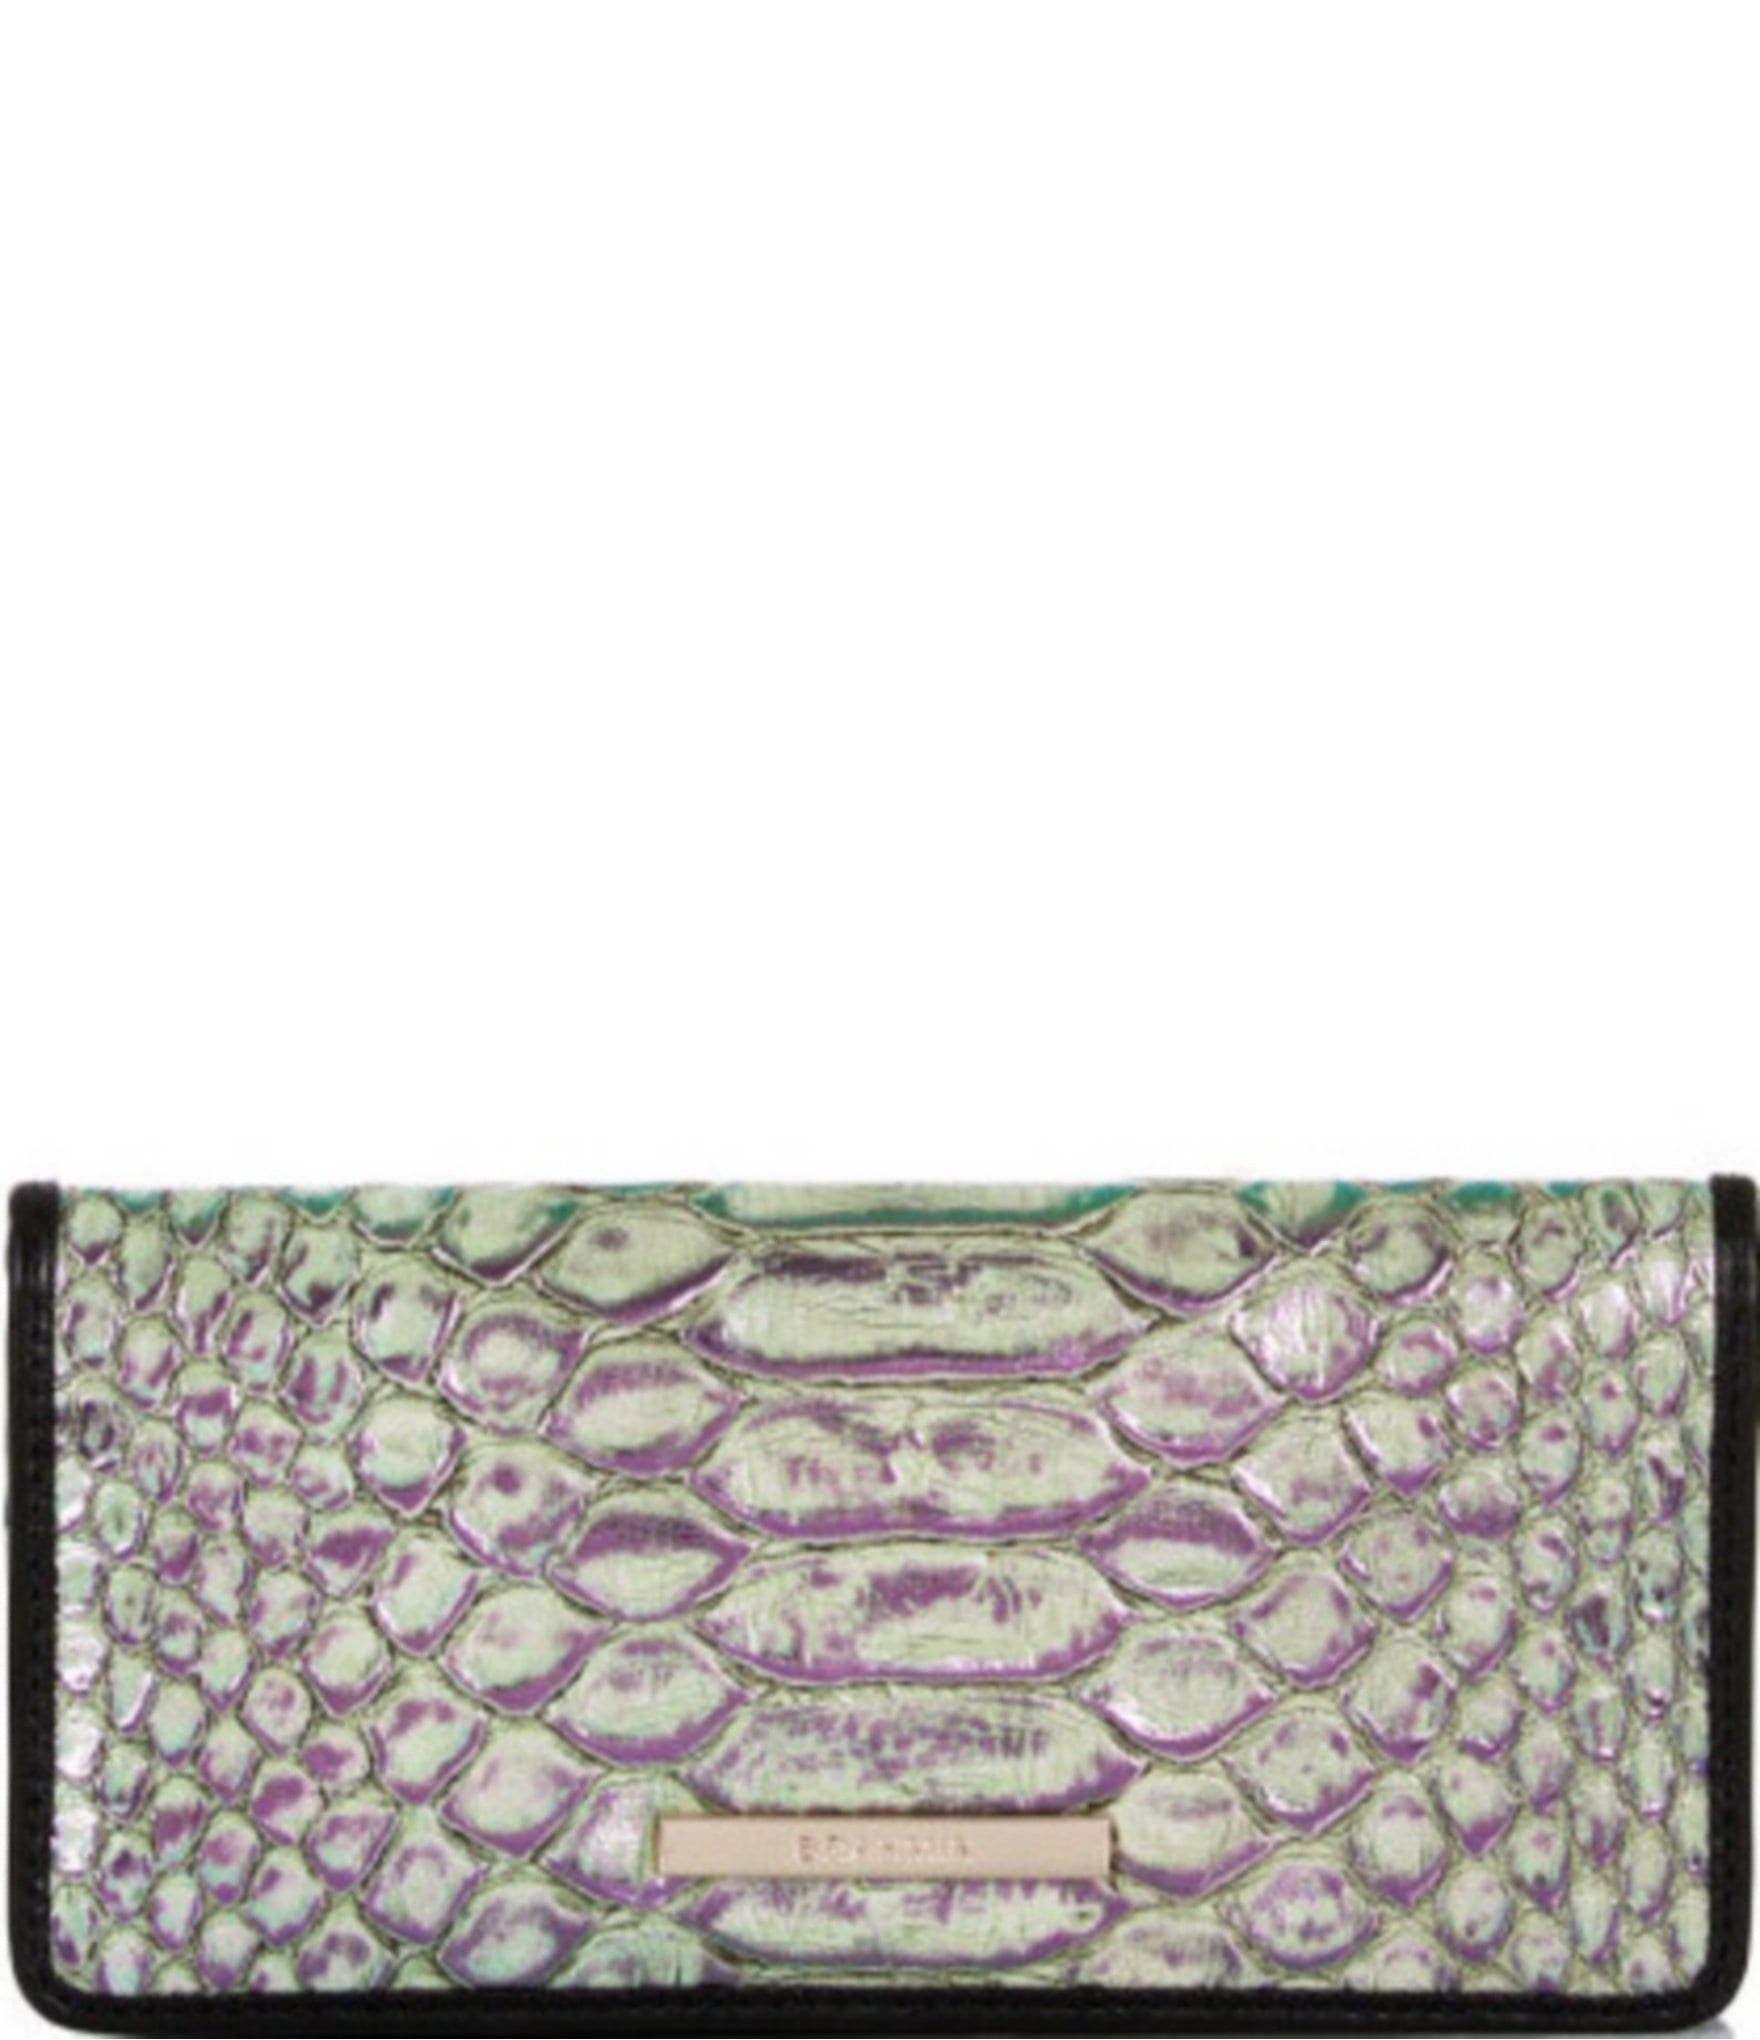 BRAHMIN Harkness Collection Ady Wallet